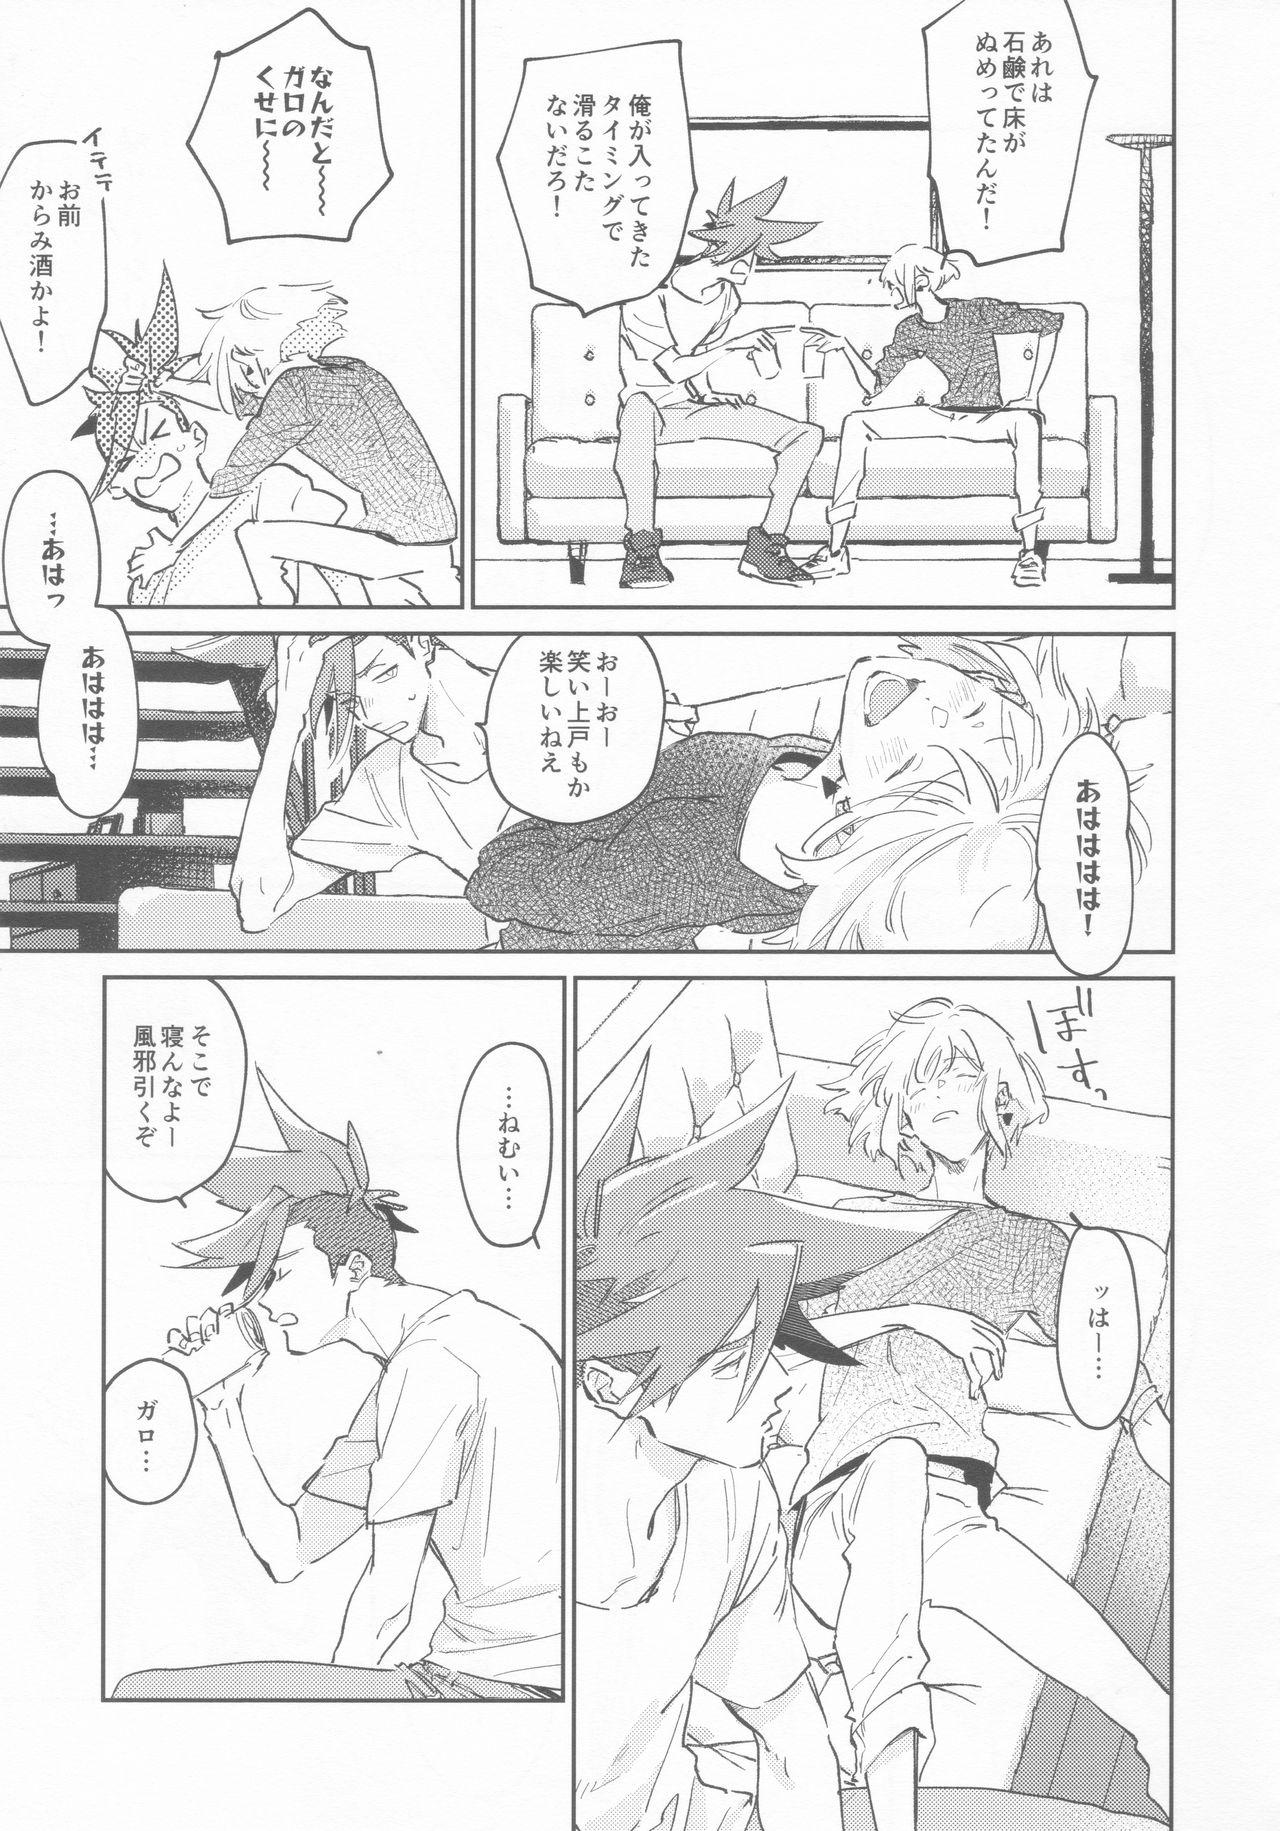 Longhair LOVE IS STRANGE. - Promare Joi - Page 10